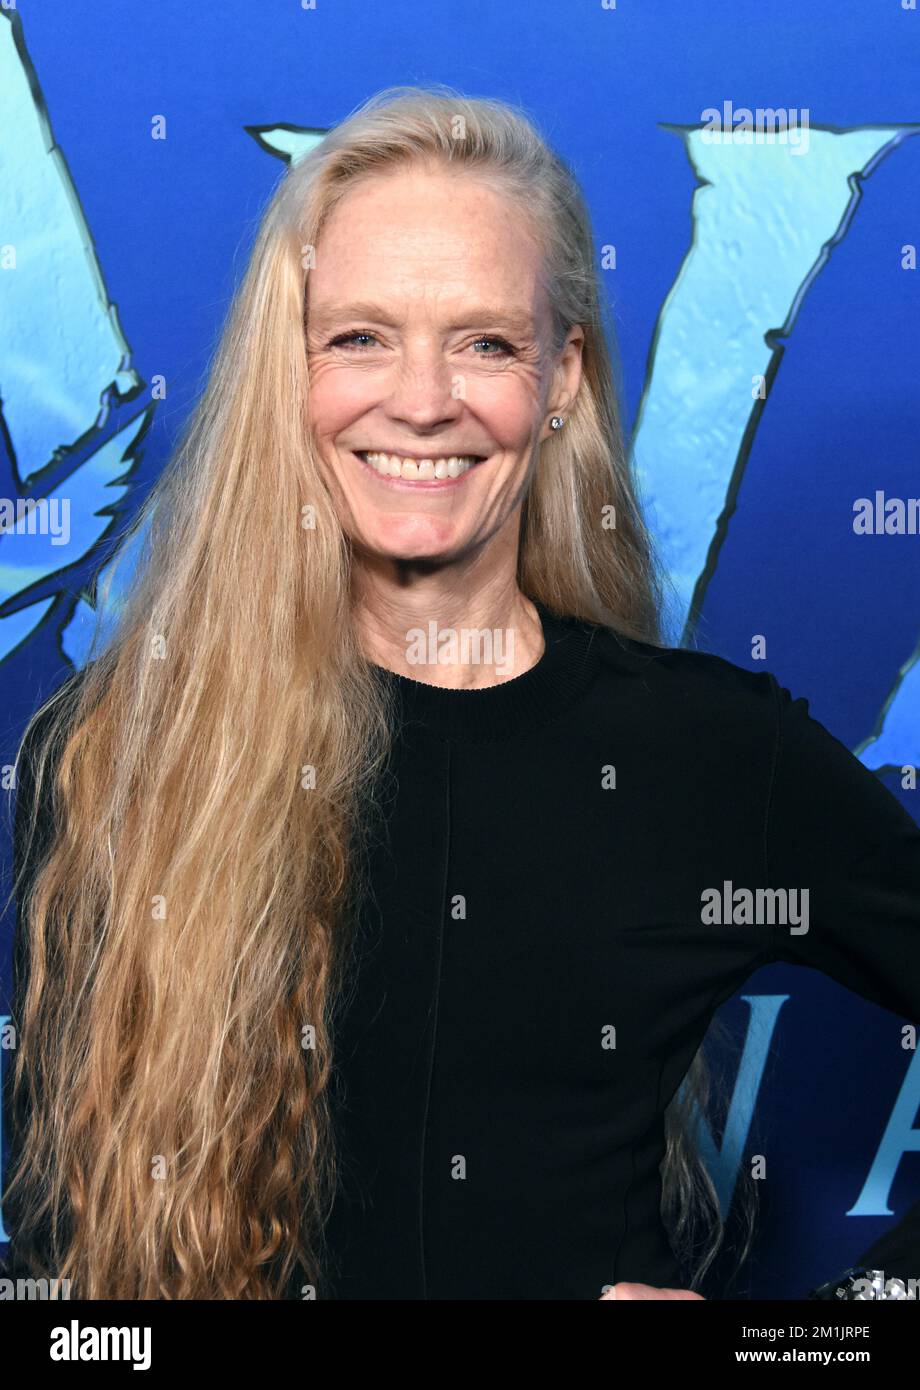 Hollywood, California, USA 12th December 2022 Actress Suzy Amis Cameron attends 20th Century Studio's 'Avatar 2: The Way of Water' U.S. Premiere at Dolby Theatre on December 12, 2022 in Hollywood, California, USA. Photo by Barry King/Alamy Live News Stock Photo